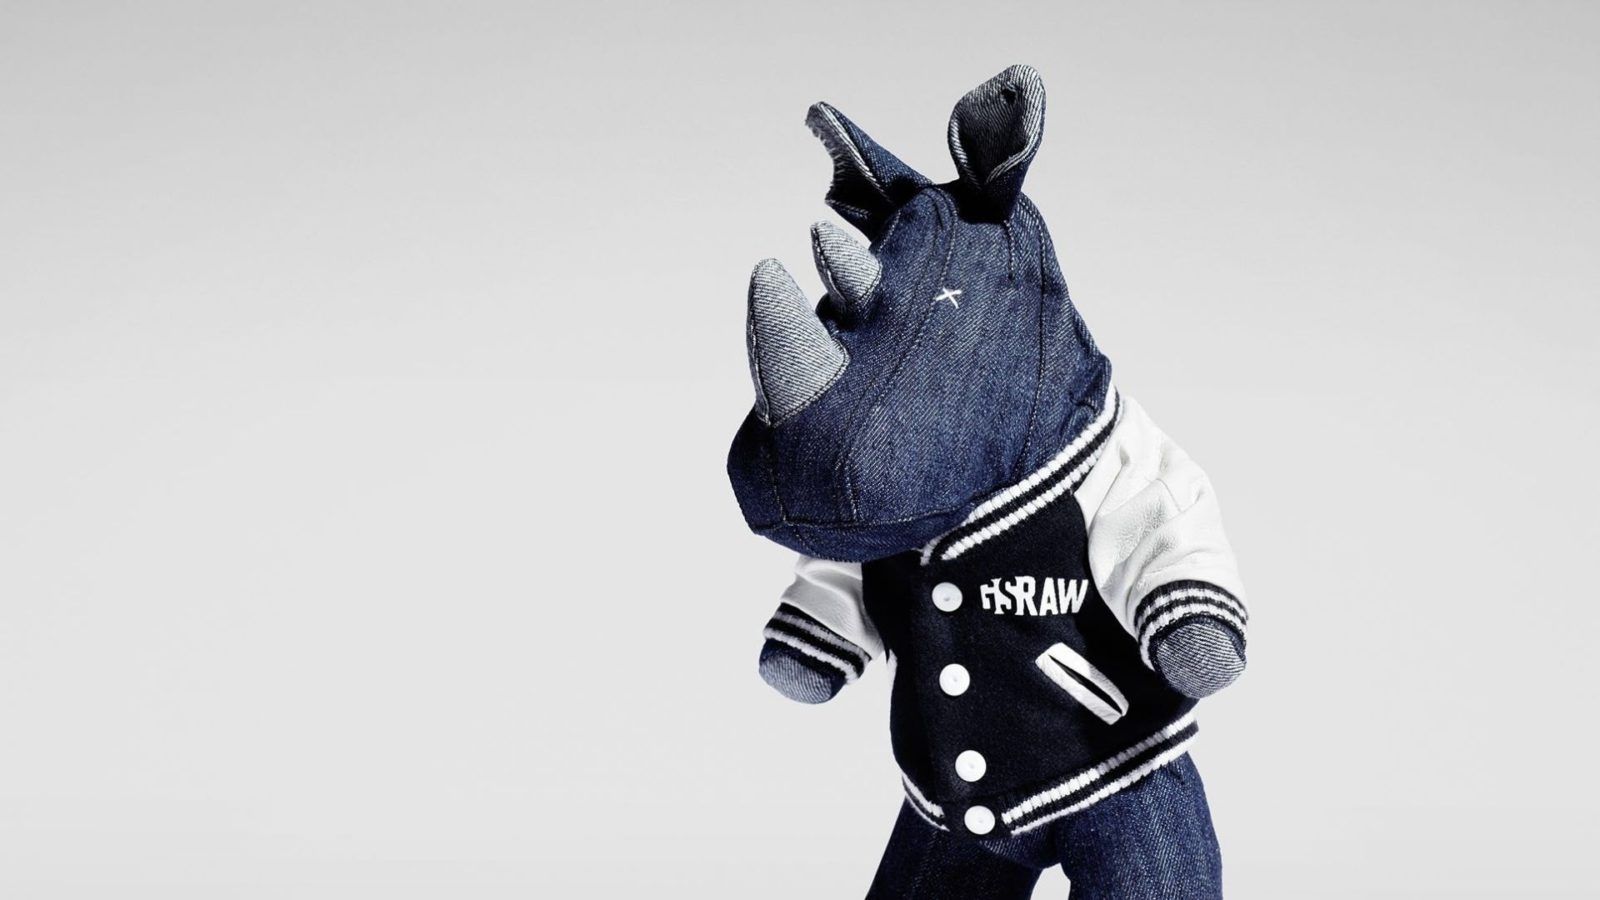 Keep an eye out for the first denim NFT collection from G-Star RAW